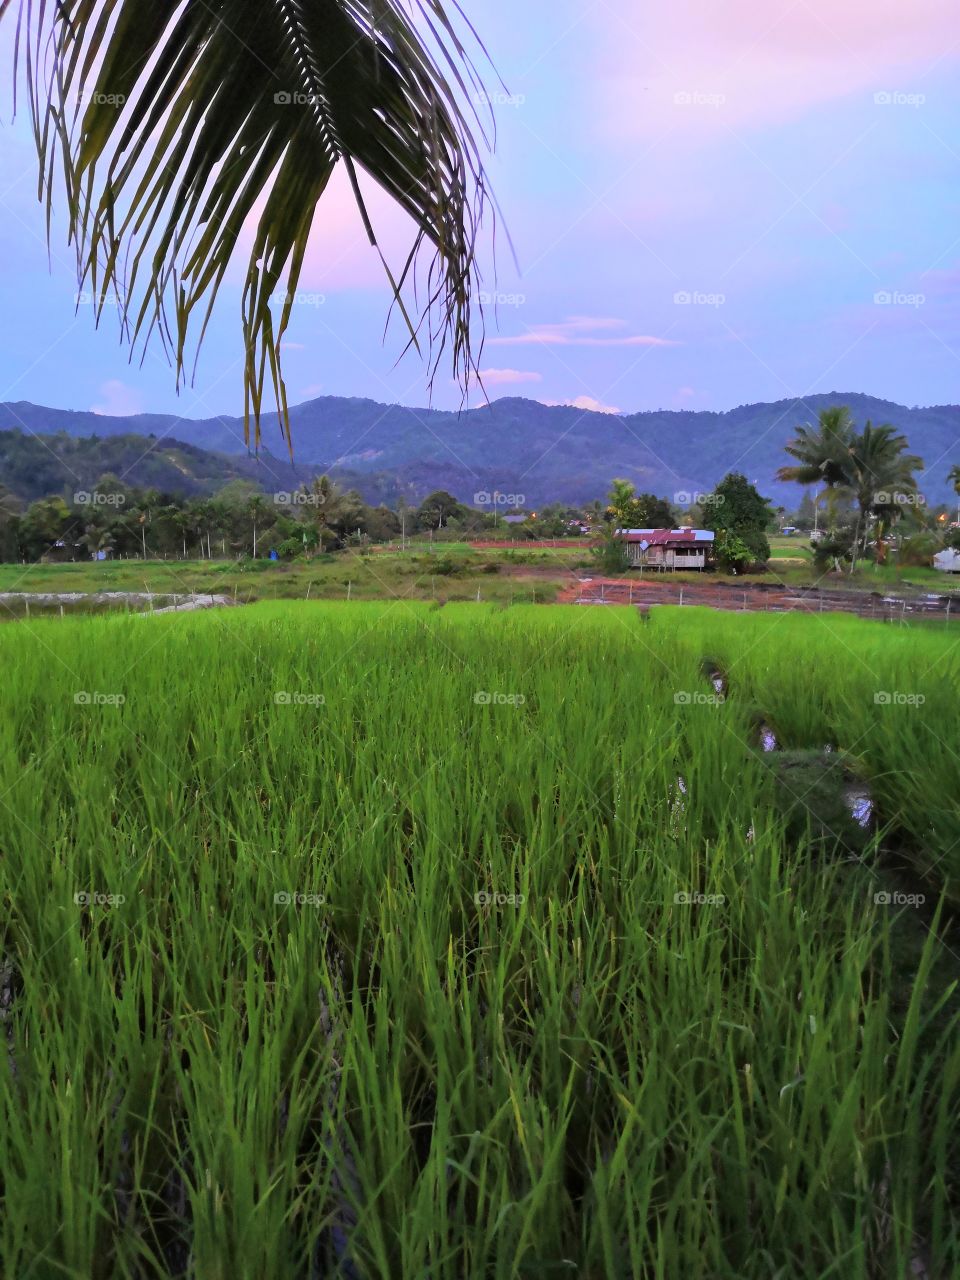 Paddy field in my village. It is during evening when i shot this pic